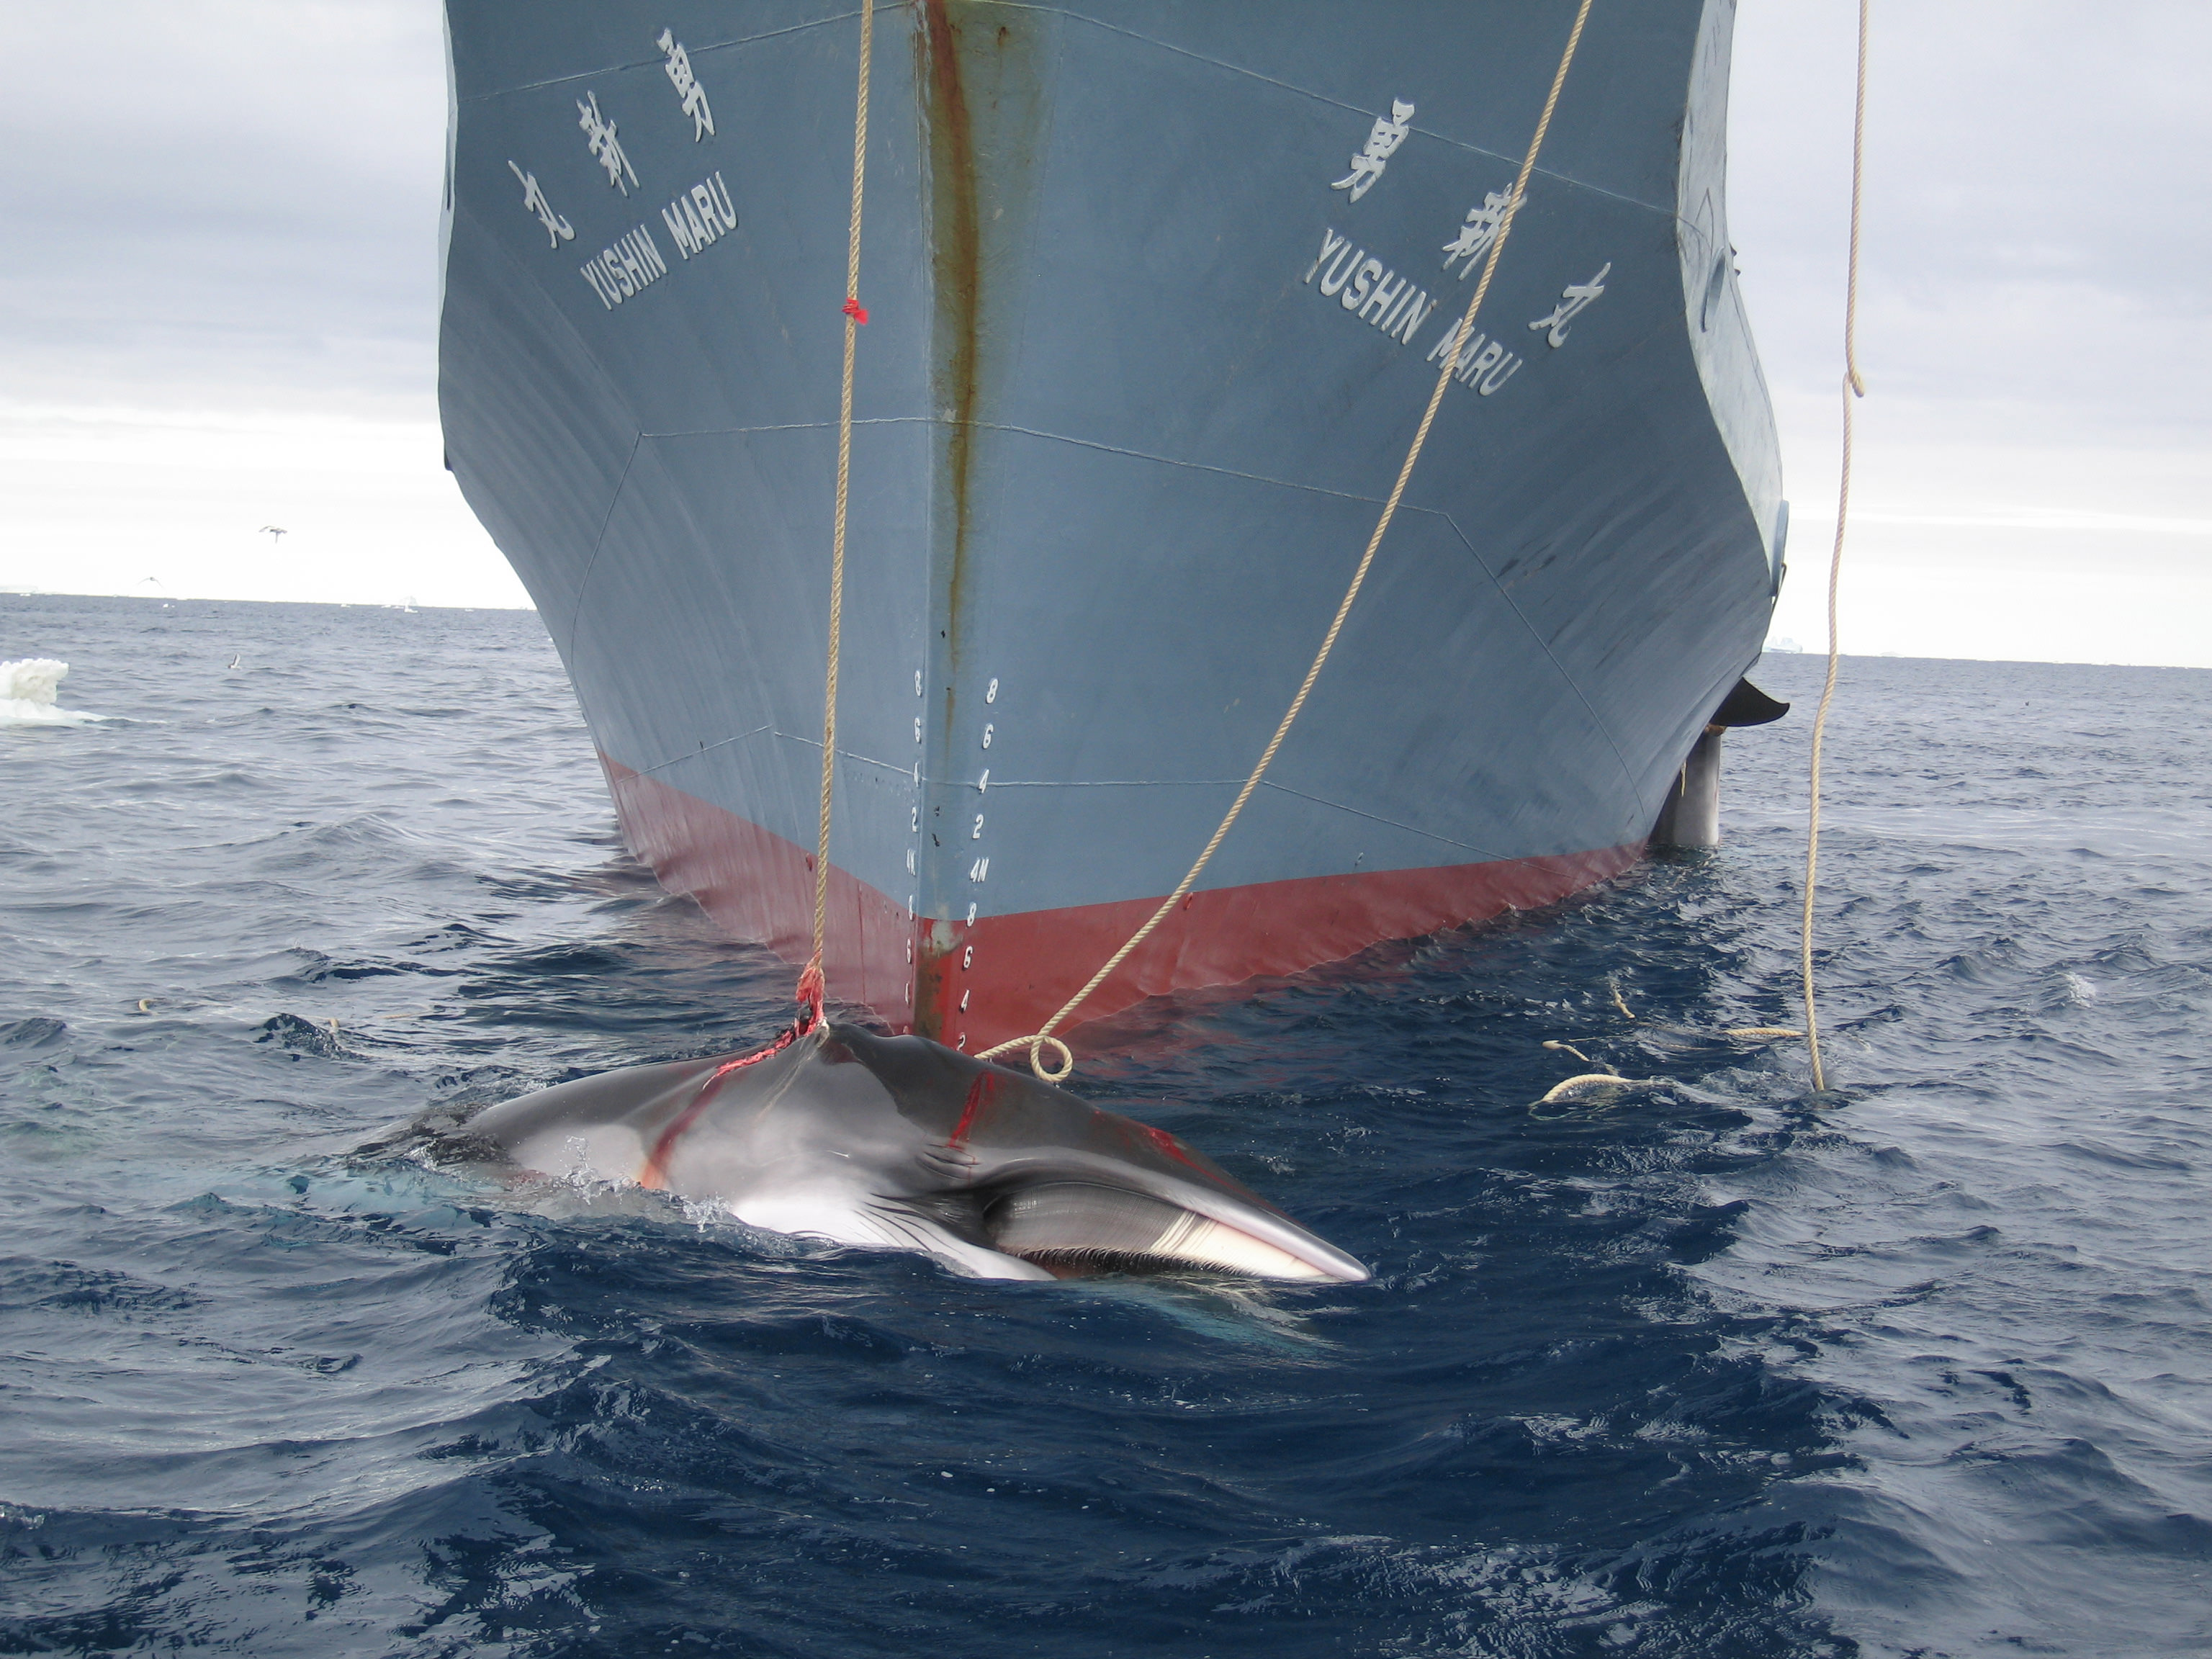 A whale is captured by the Yushin Maru. / photo: Australian Customs and Border Protection Service